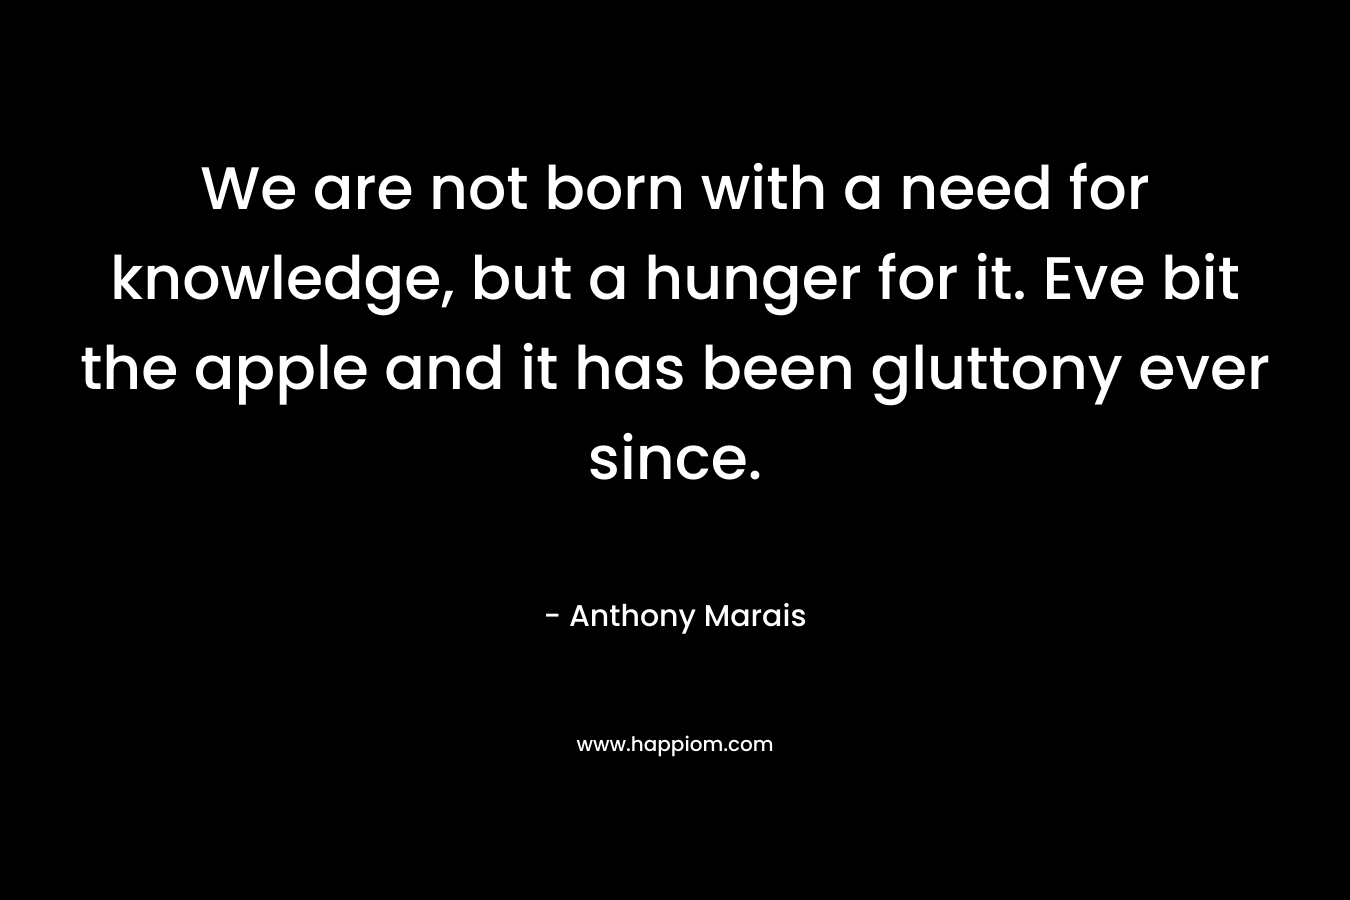 We are not born with a need for knowledge, but a hunger for it. Eve bit the apple and it has been gluttony ever since. – Anthony Marais